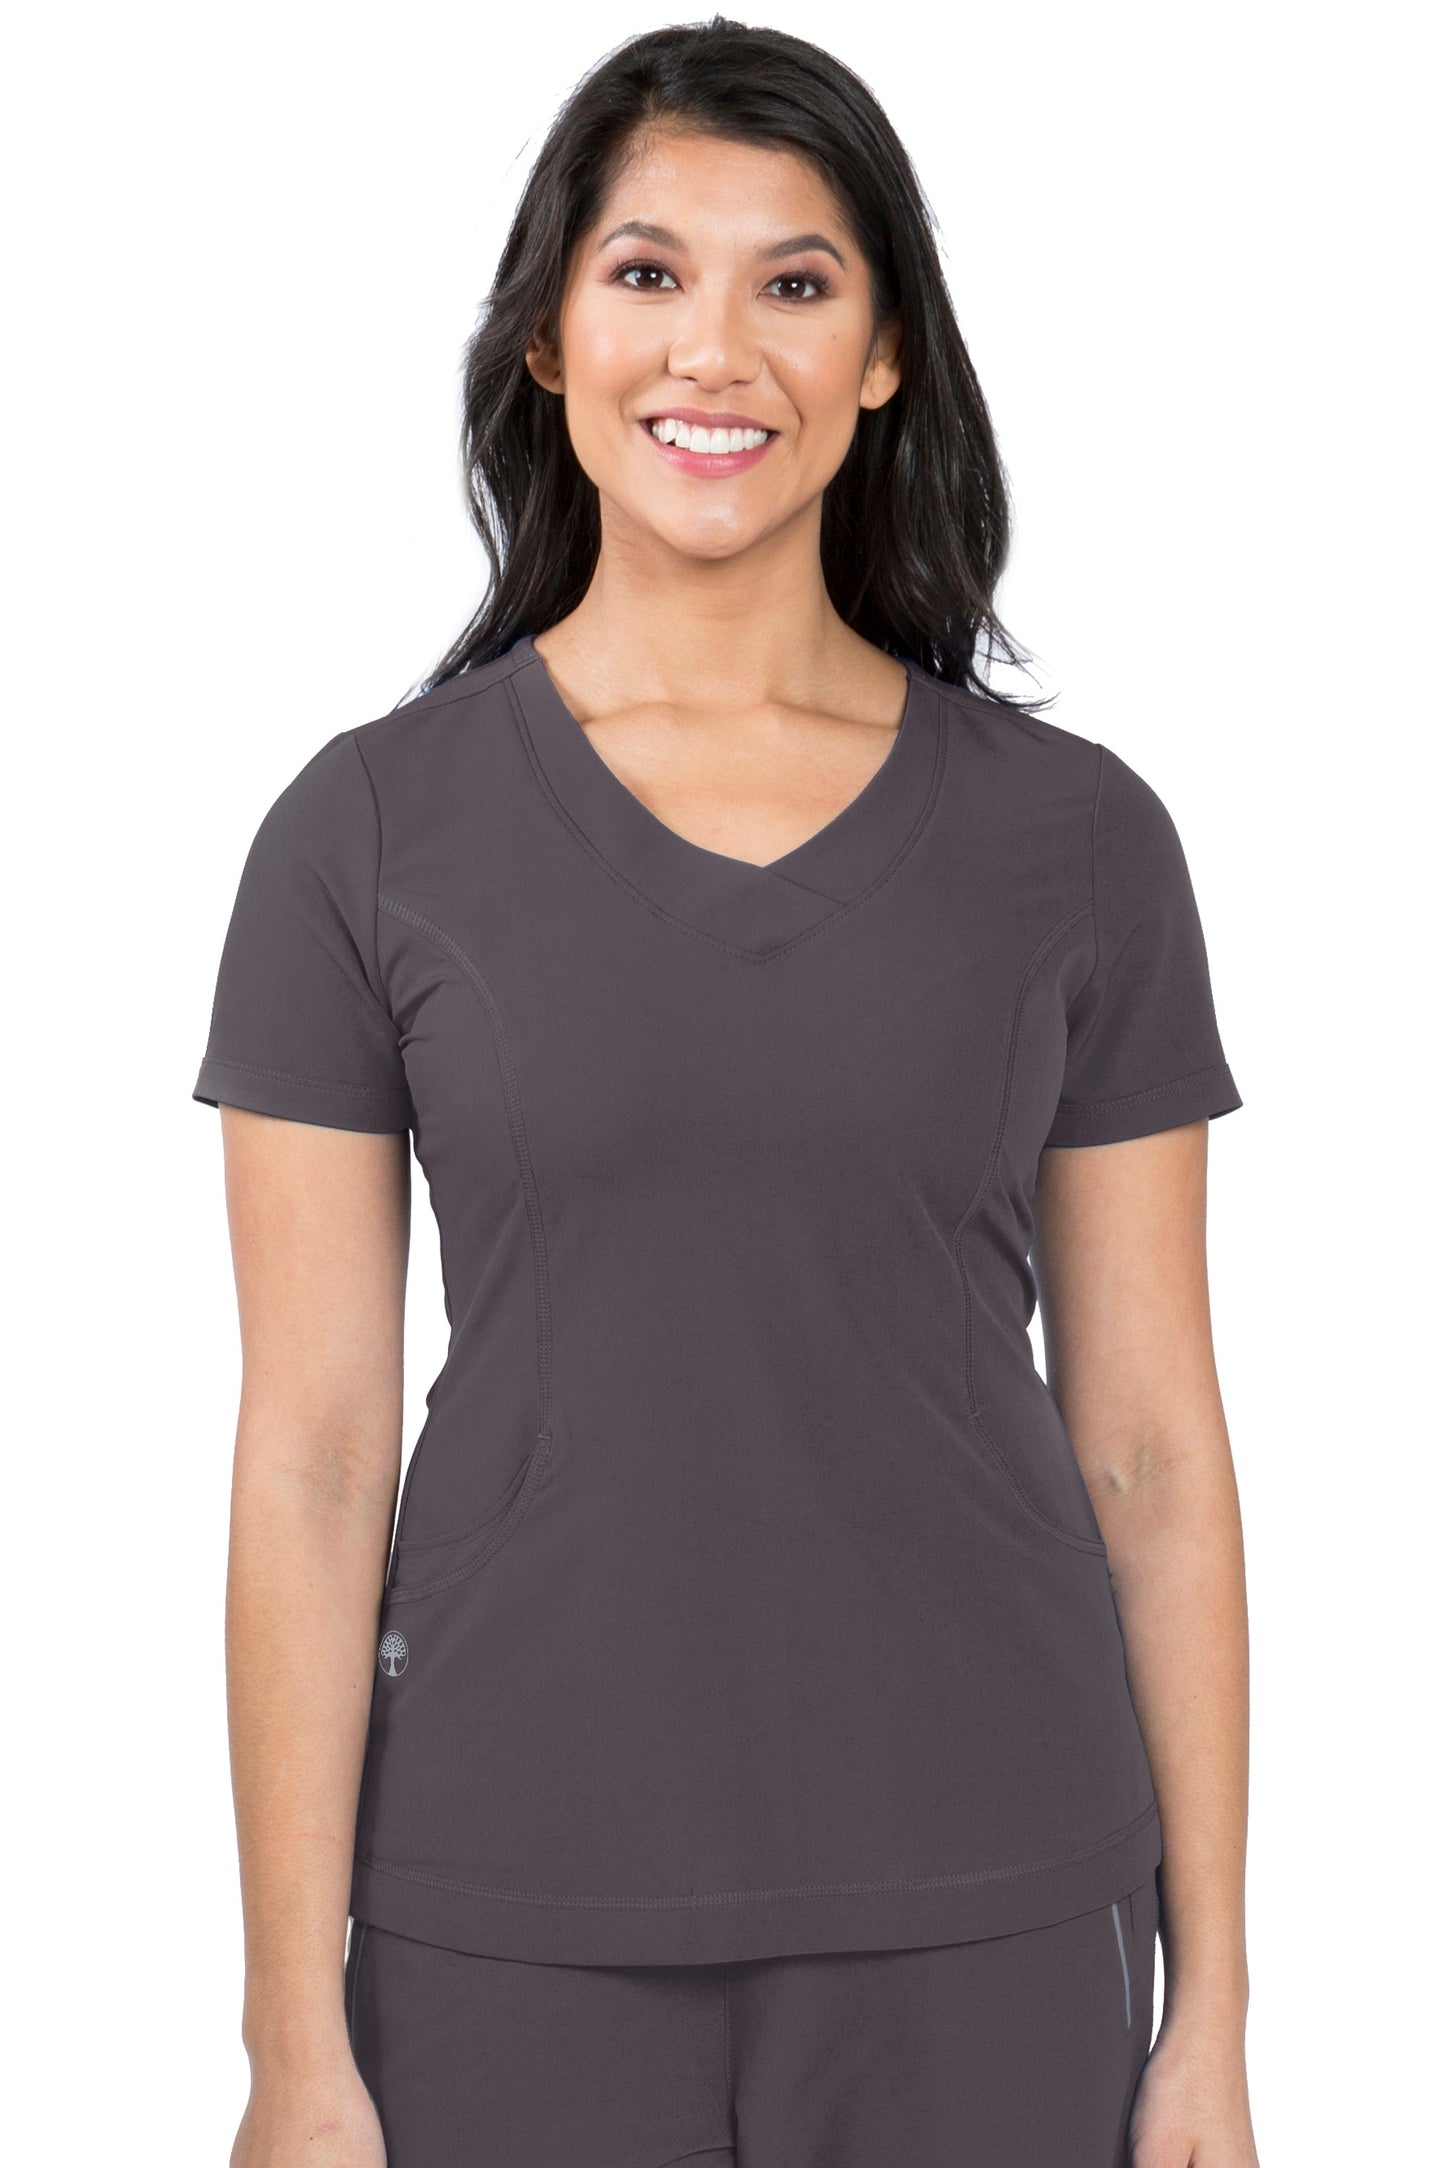 Healing Hands HH360 Sloan Scrub Top in Pewter at Parker's Clothing and Shoes.